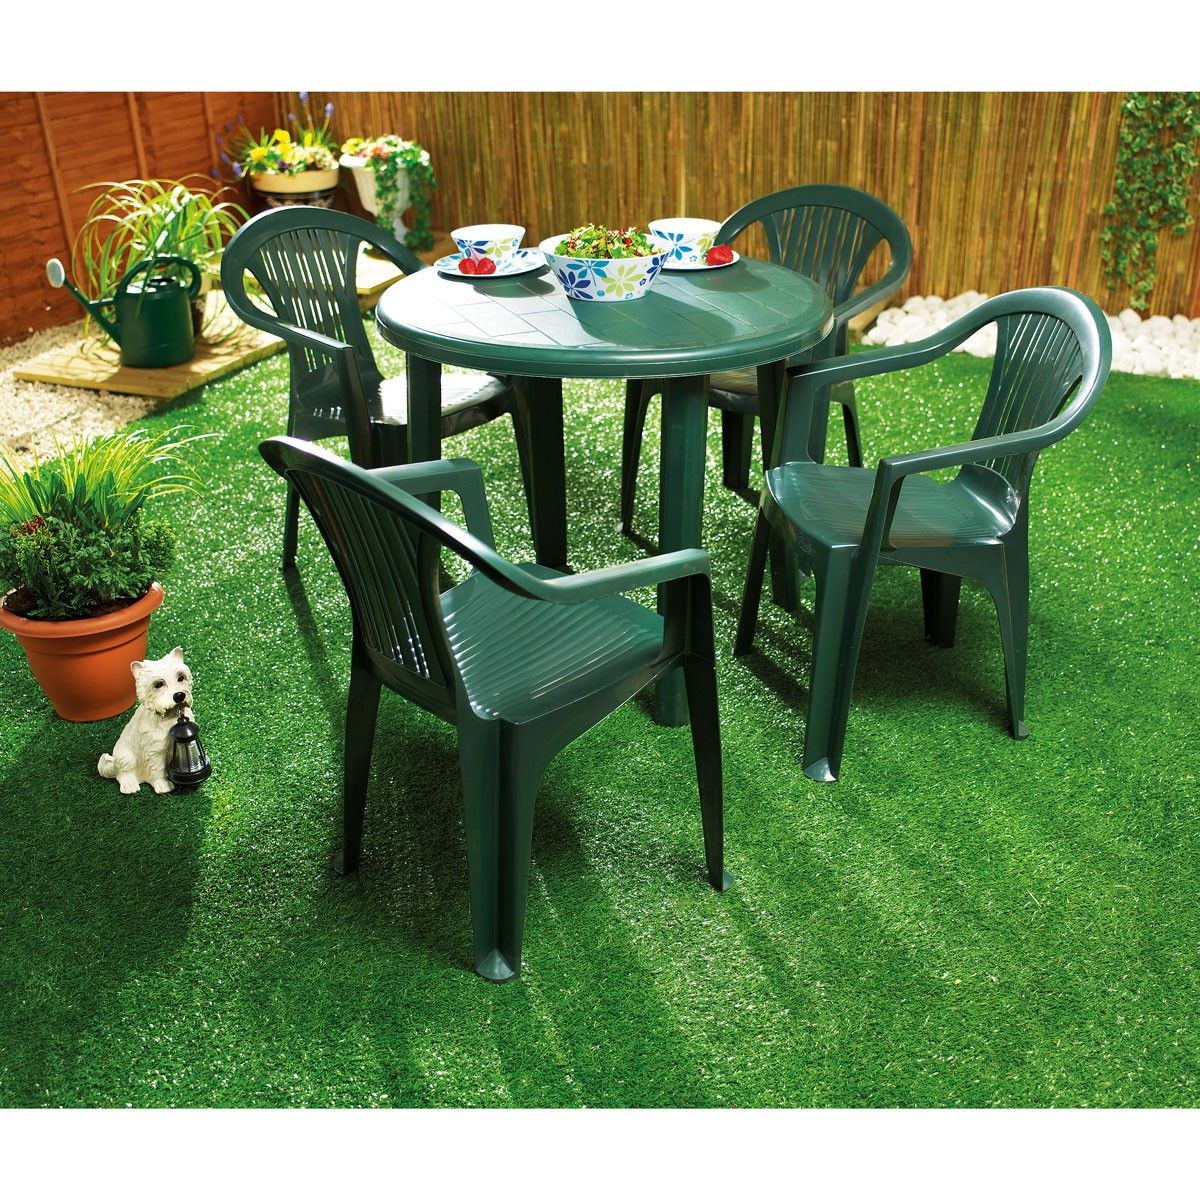 green plastic garden table for home use OJYNTIC